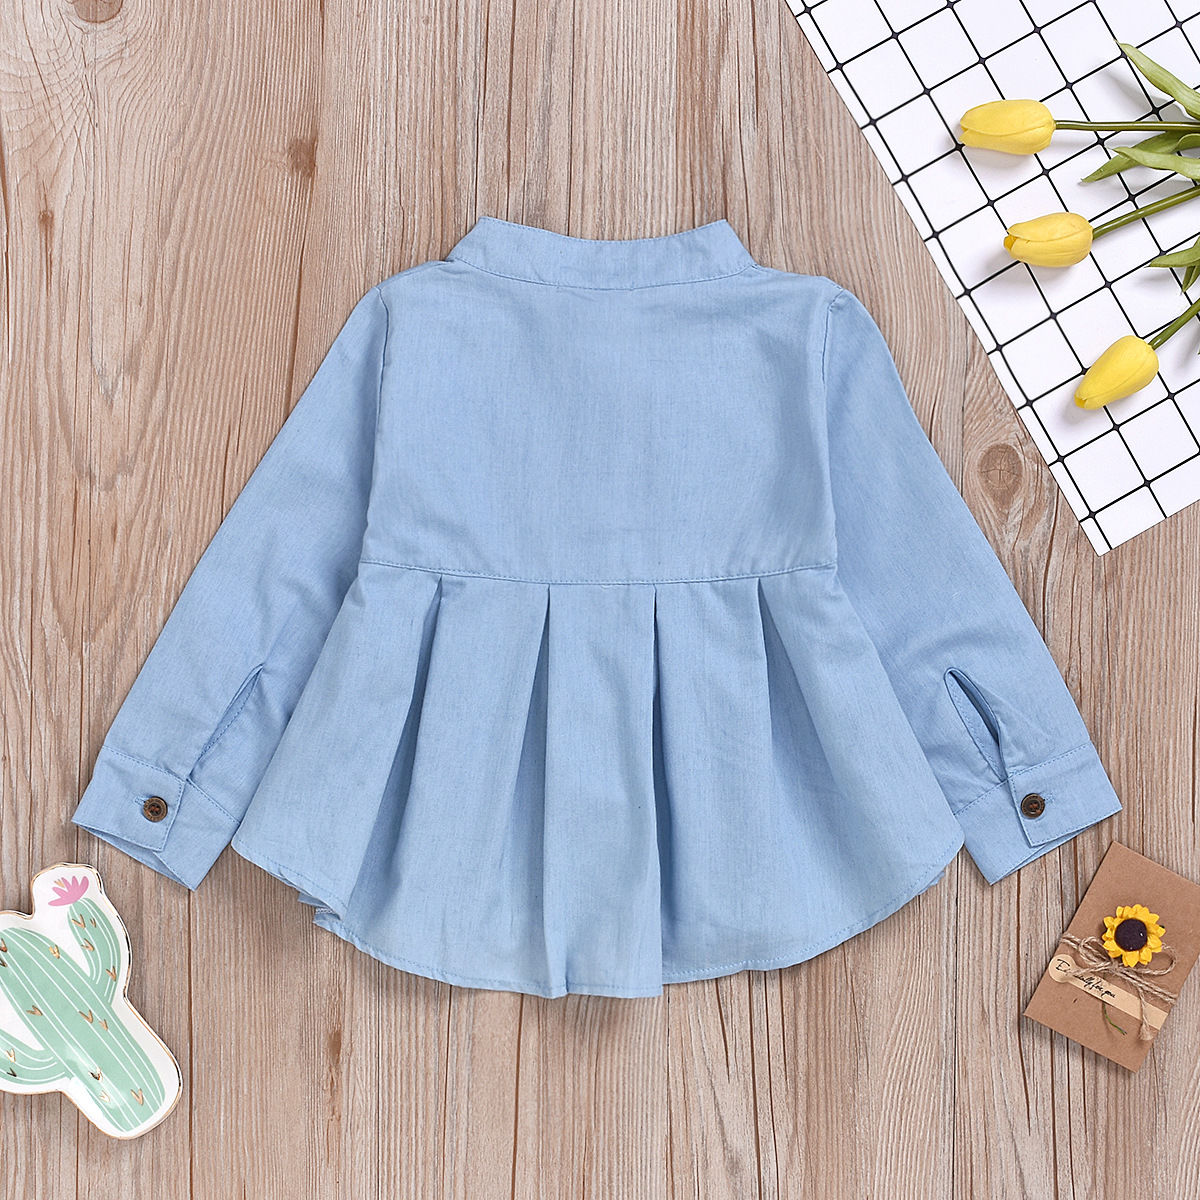 Girls' long-sleeved shirts, children's baby skirts, the latest stand-up collar cotton denim spring tops, children's clothing jackets